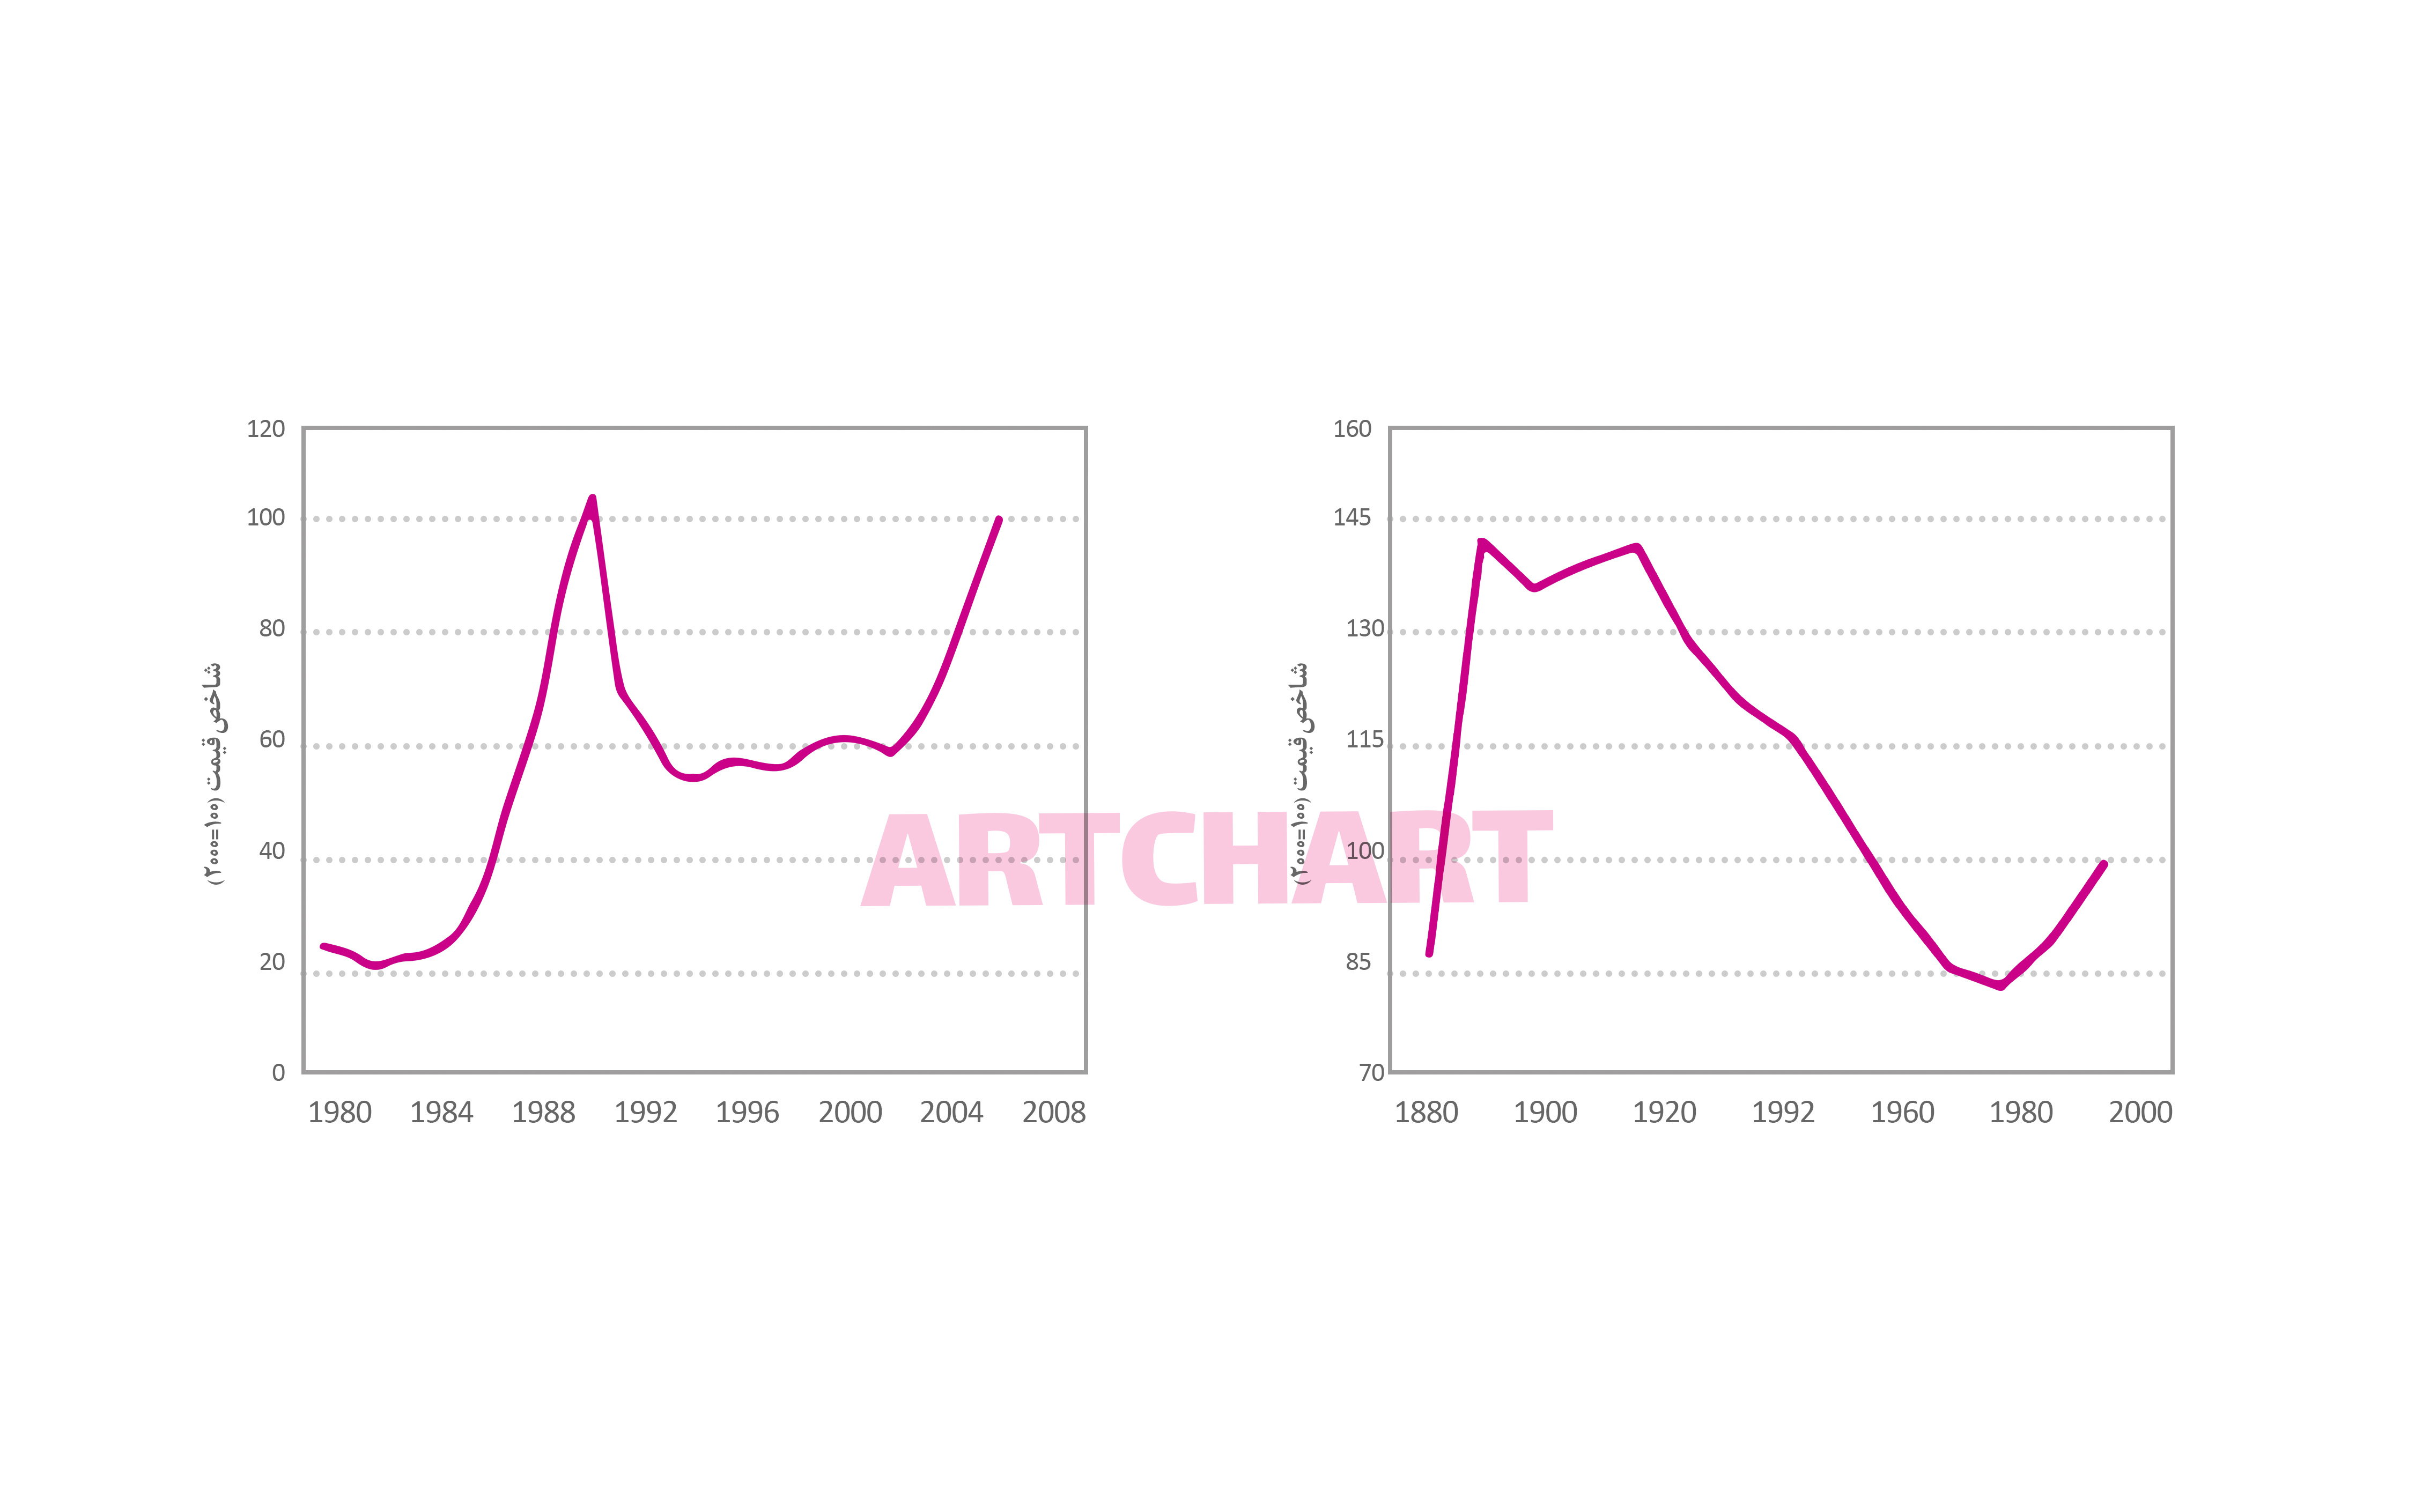 Hedonic Art Price Index, 1980 -2005, and Creation Period Index